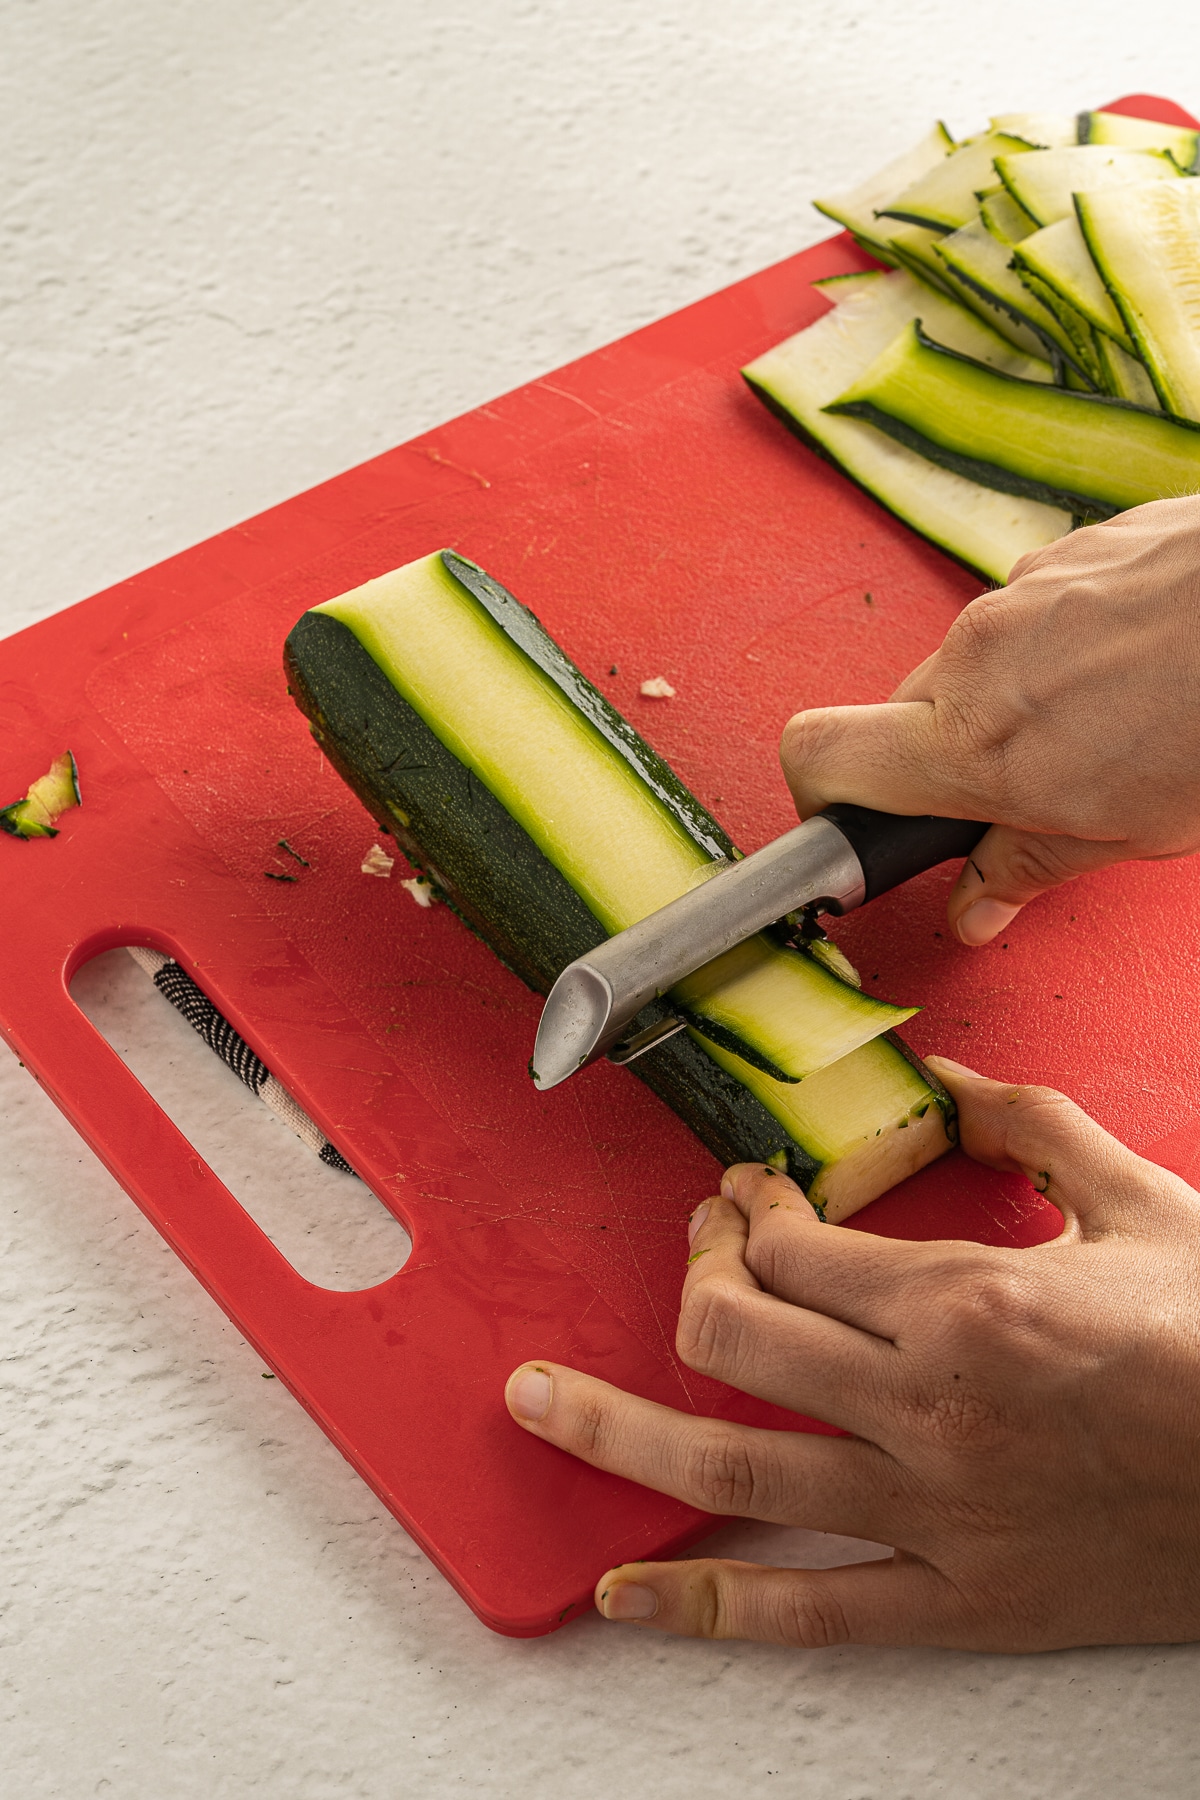 Picture of two hands grating zucchini on a red cutting board.